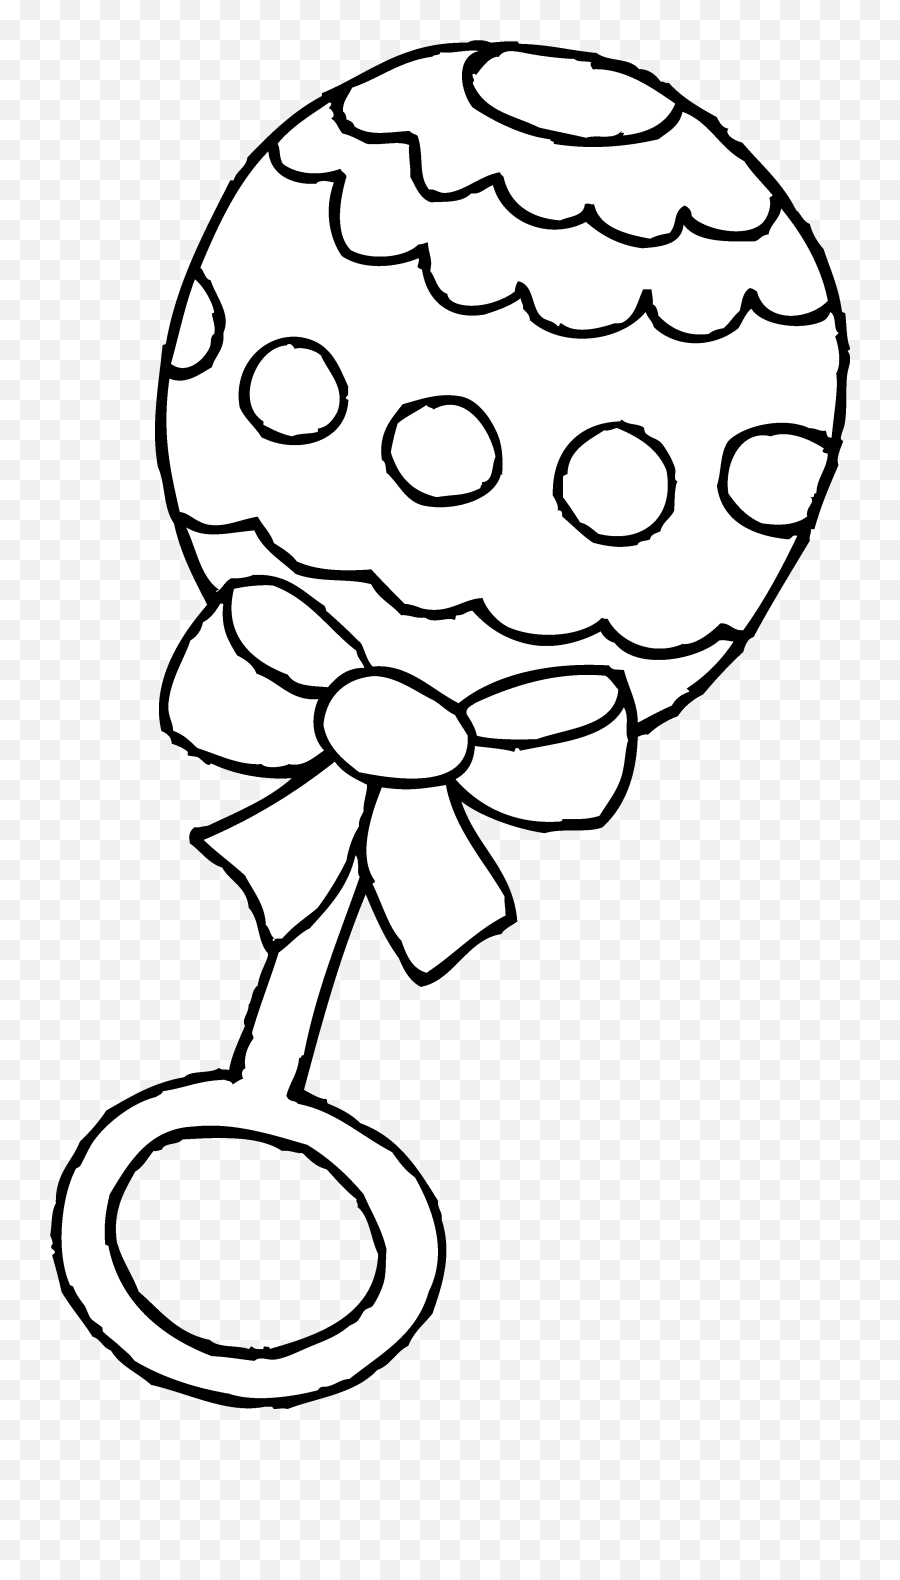 Baby Rattle Coloring Page Free Clip Art U2013 Gclipartcom - Baby Toys Clipart Black And White Emoji,Rattle Emoji